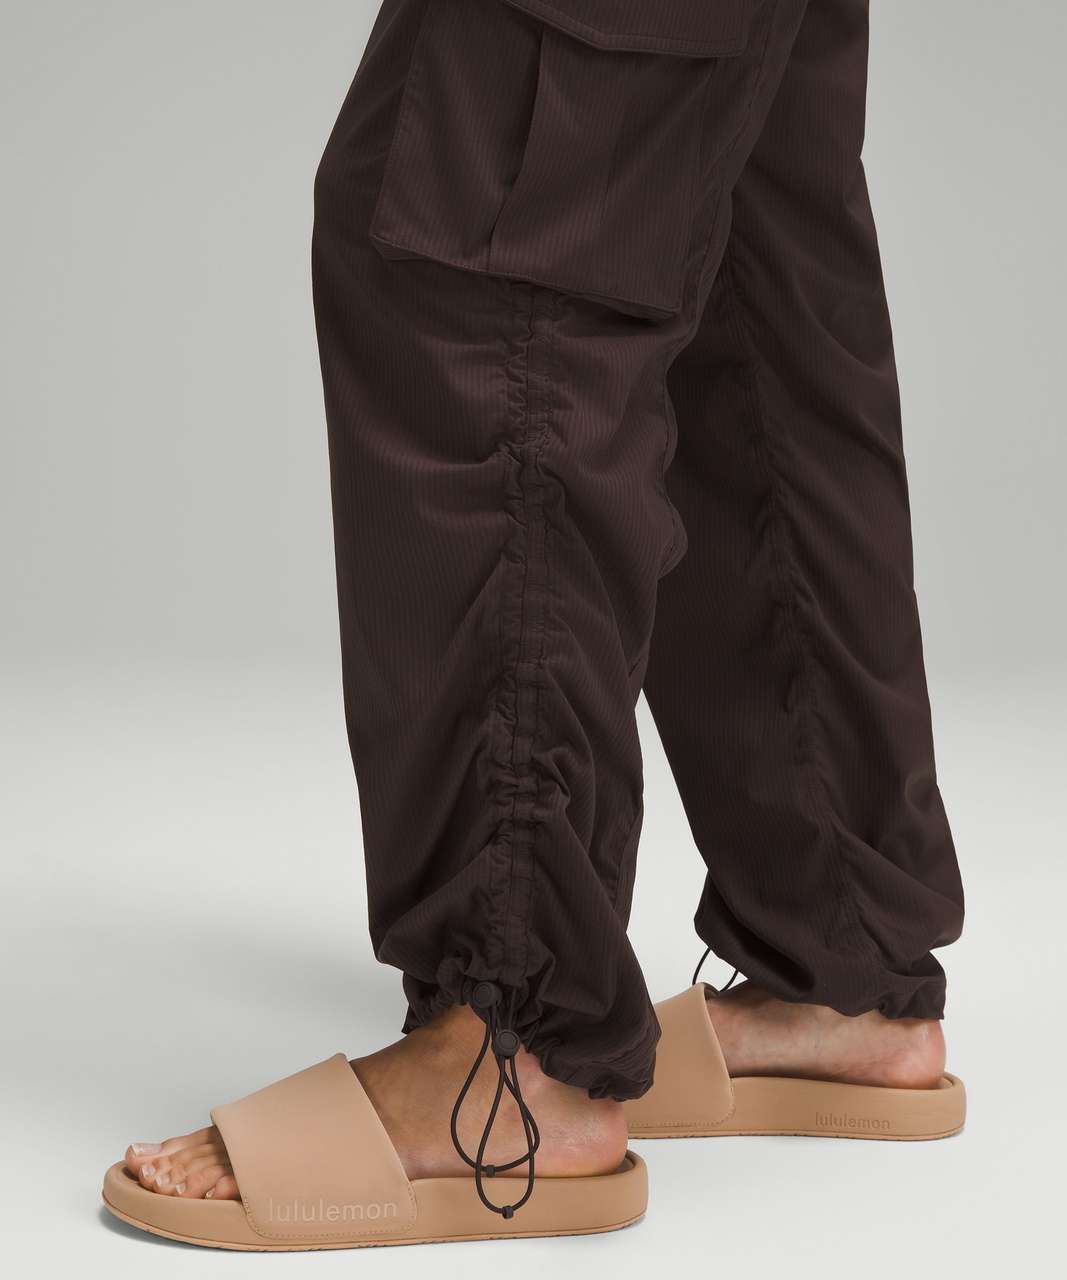 Lululemon Dance Studio Relaxed-Fit Mid-Rise Cargo Pant - Espresso